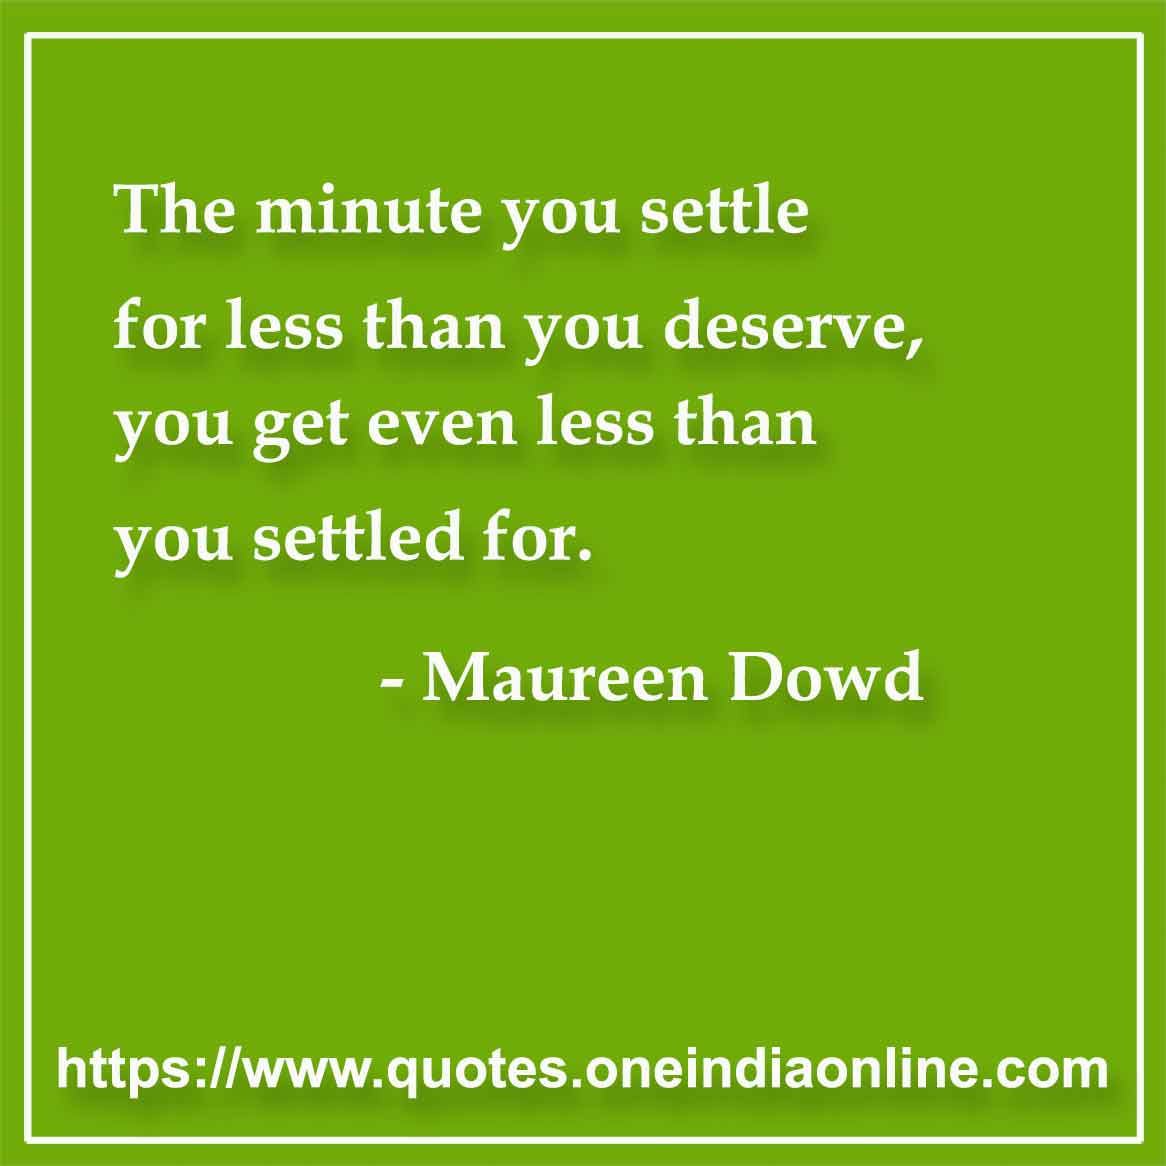 The minute you settle for less than you deserve, you get even less than you settled for.

- Maureen Dowd